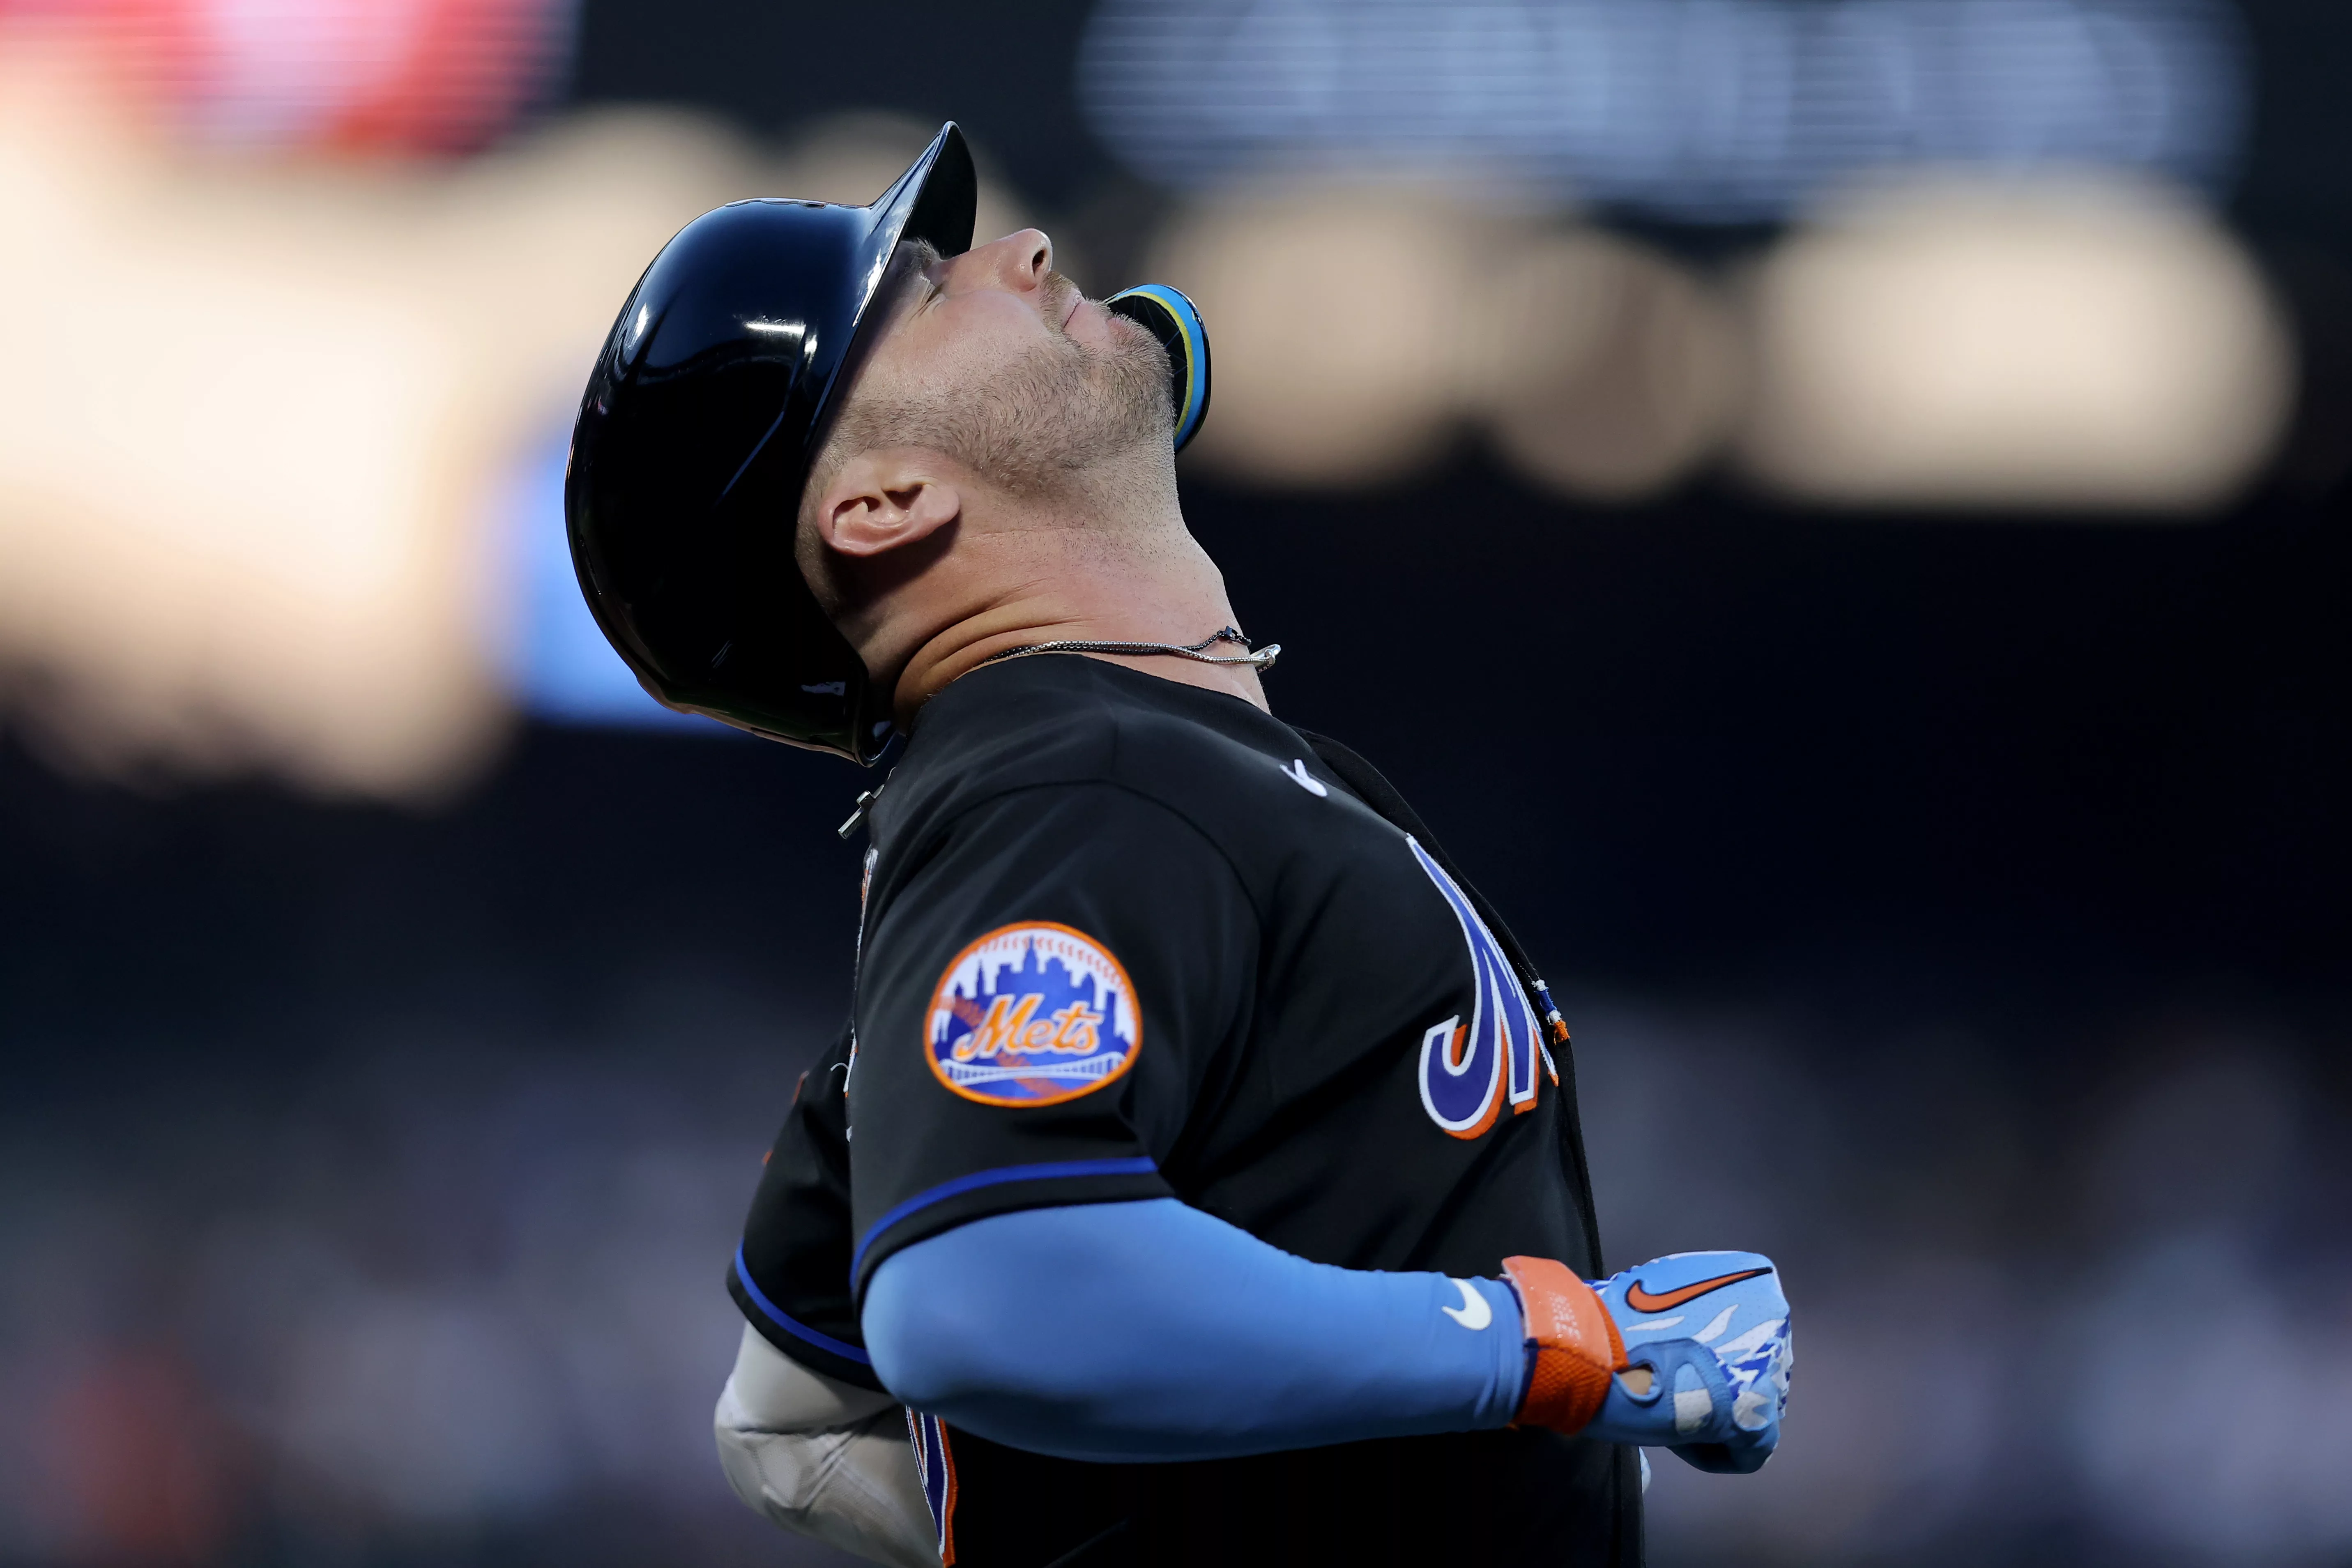 Pete Alonso thinks the Mets should bring back their black uniforms